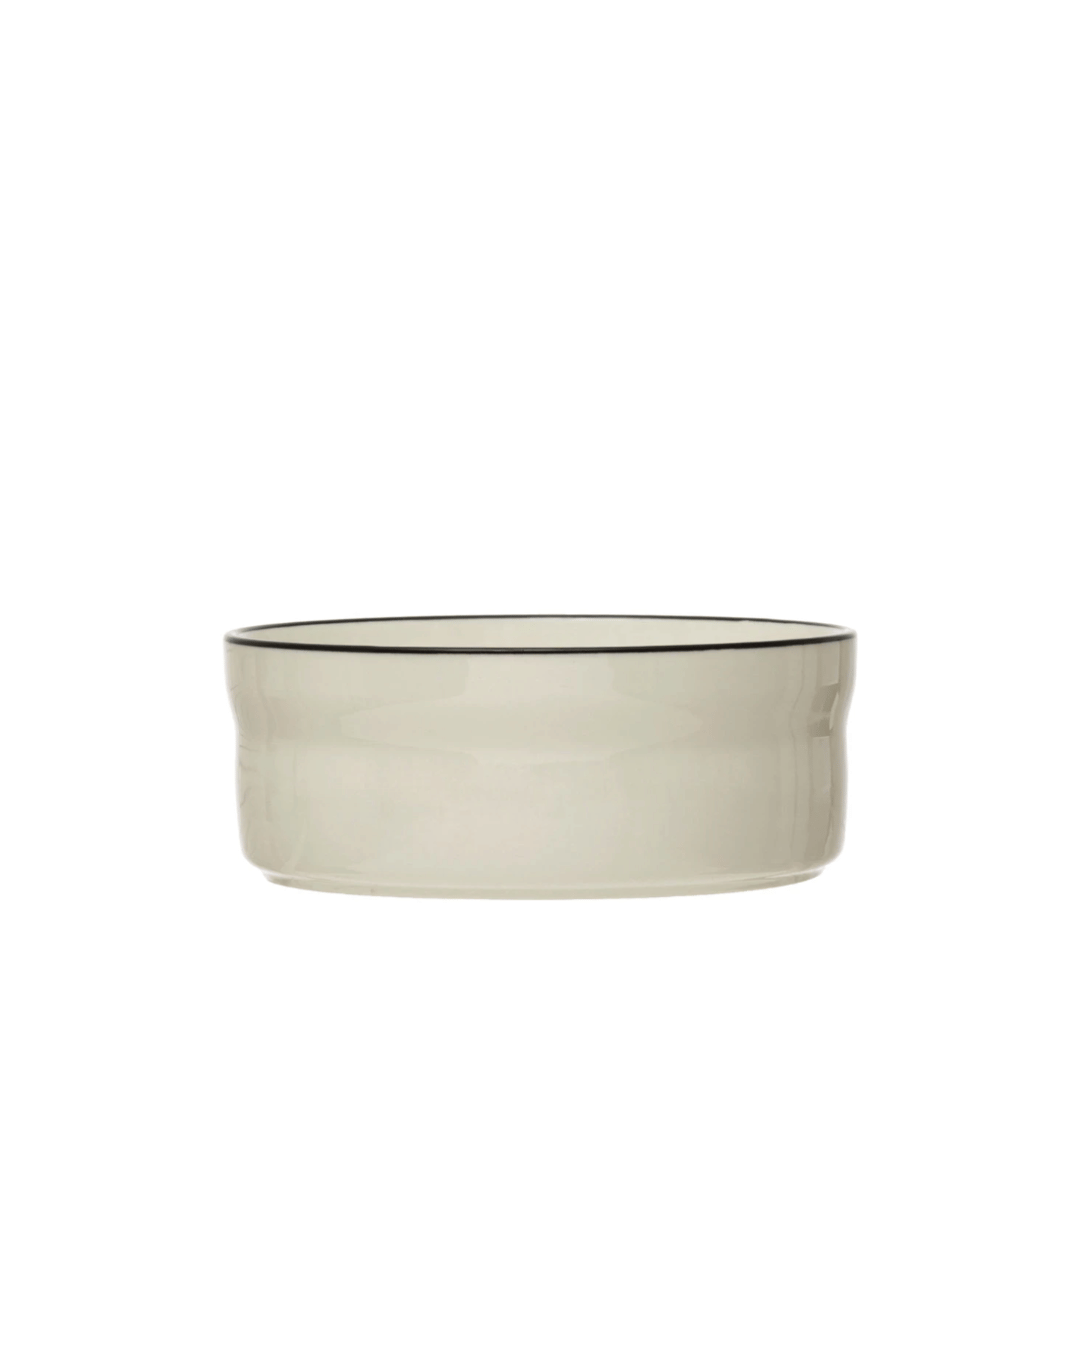 A Creative Co-op transparent glass pet bowl with a black rim, displayed against a white bungalow background.